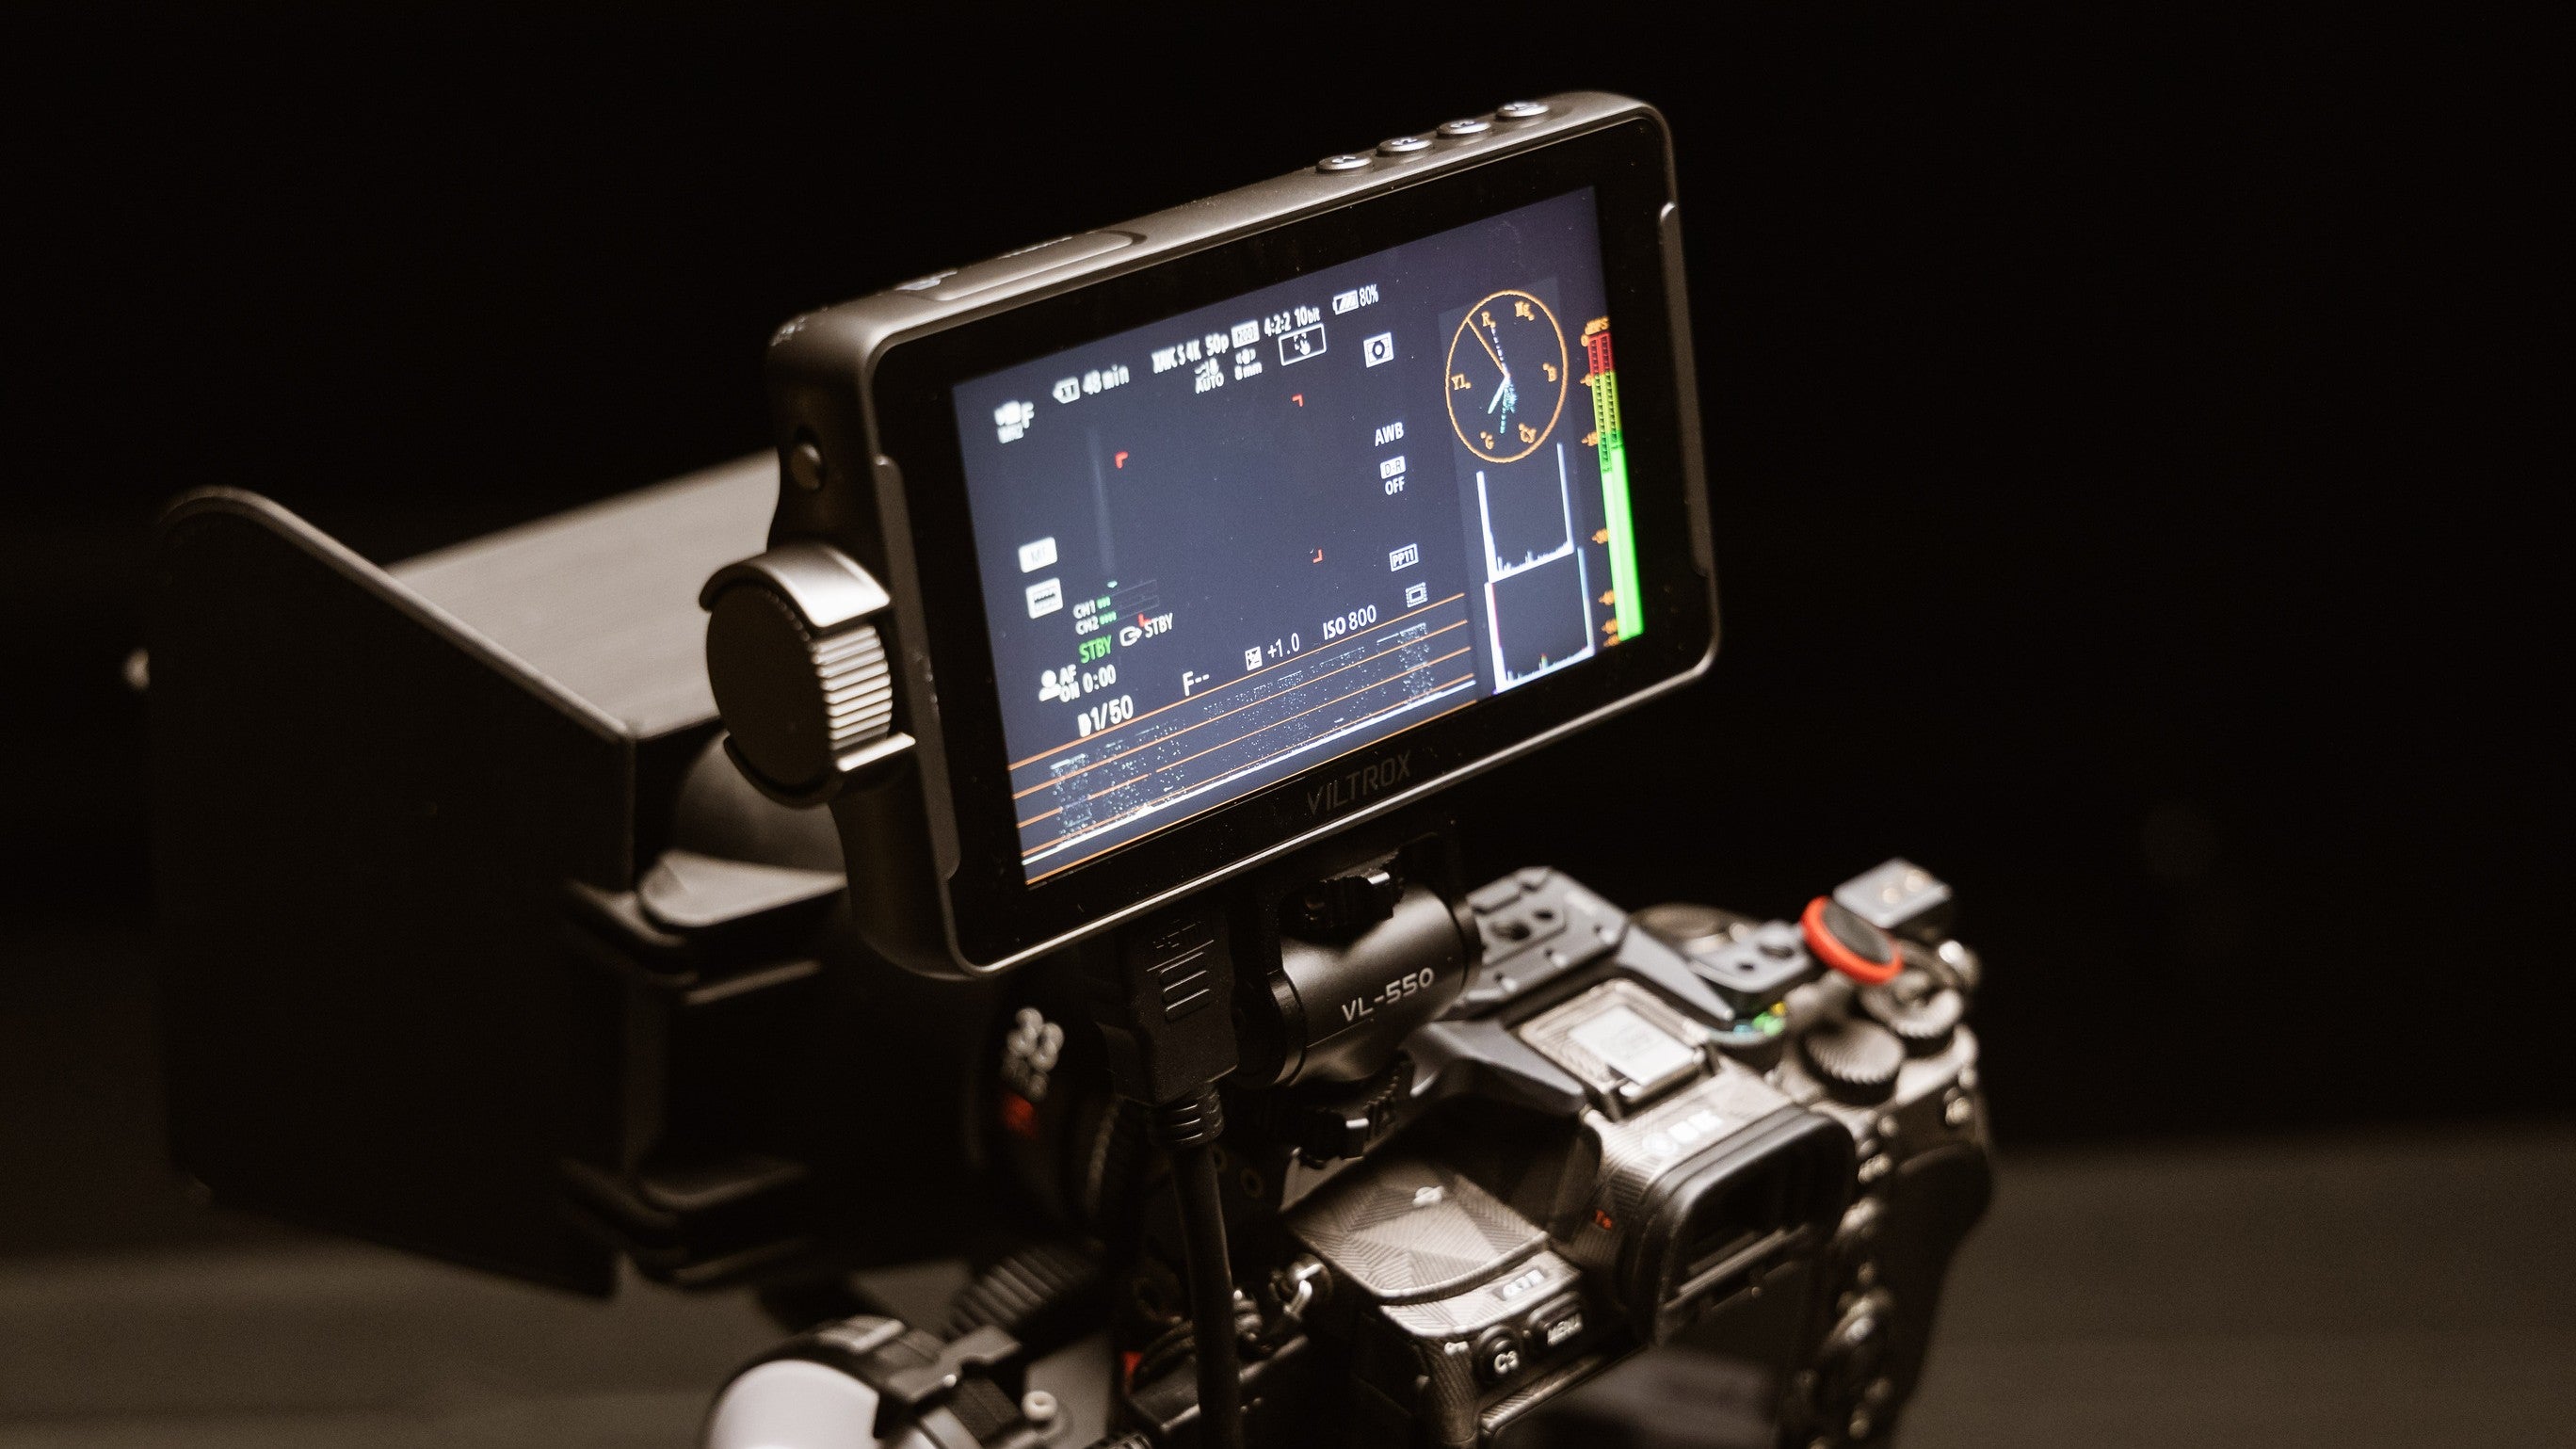 Viltrox DC550 Pro: A Bright, Sharp, and Affordable Monitor for Professional Filmmakers